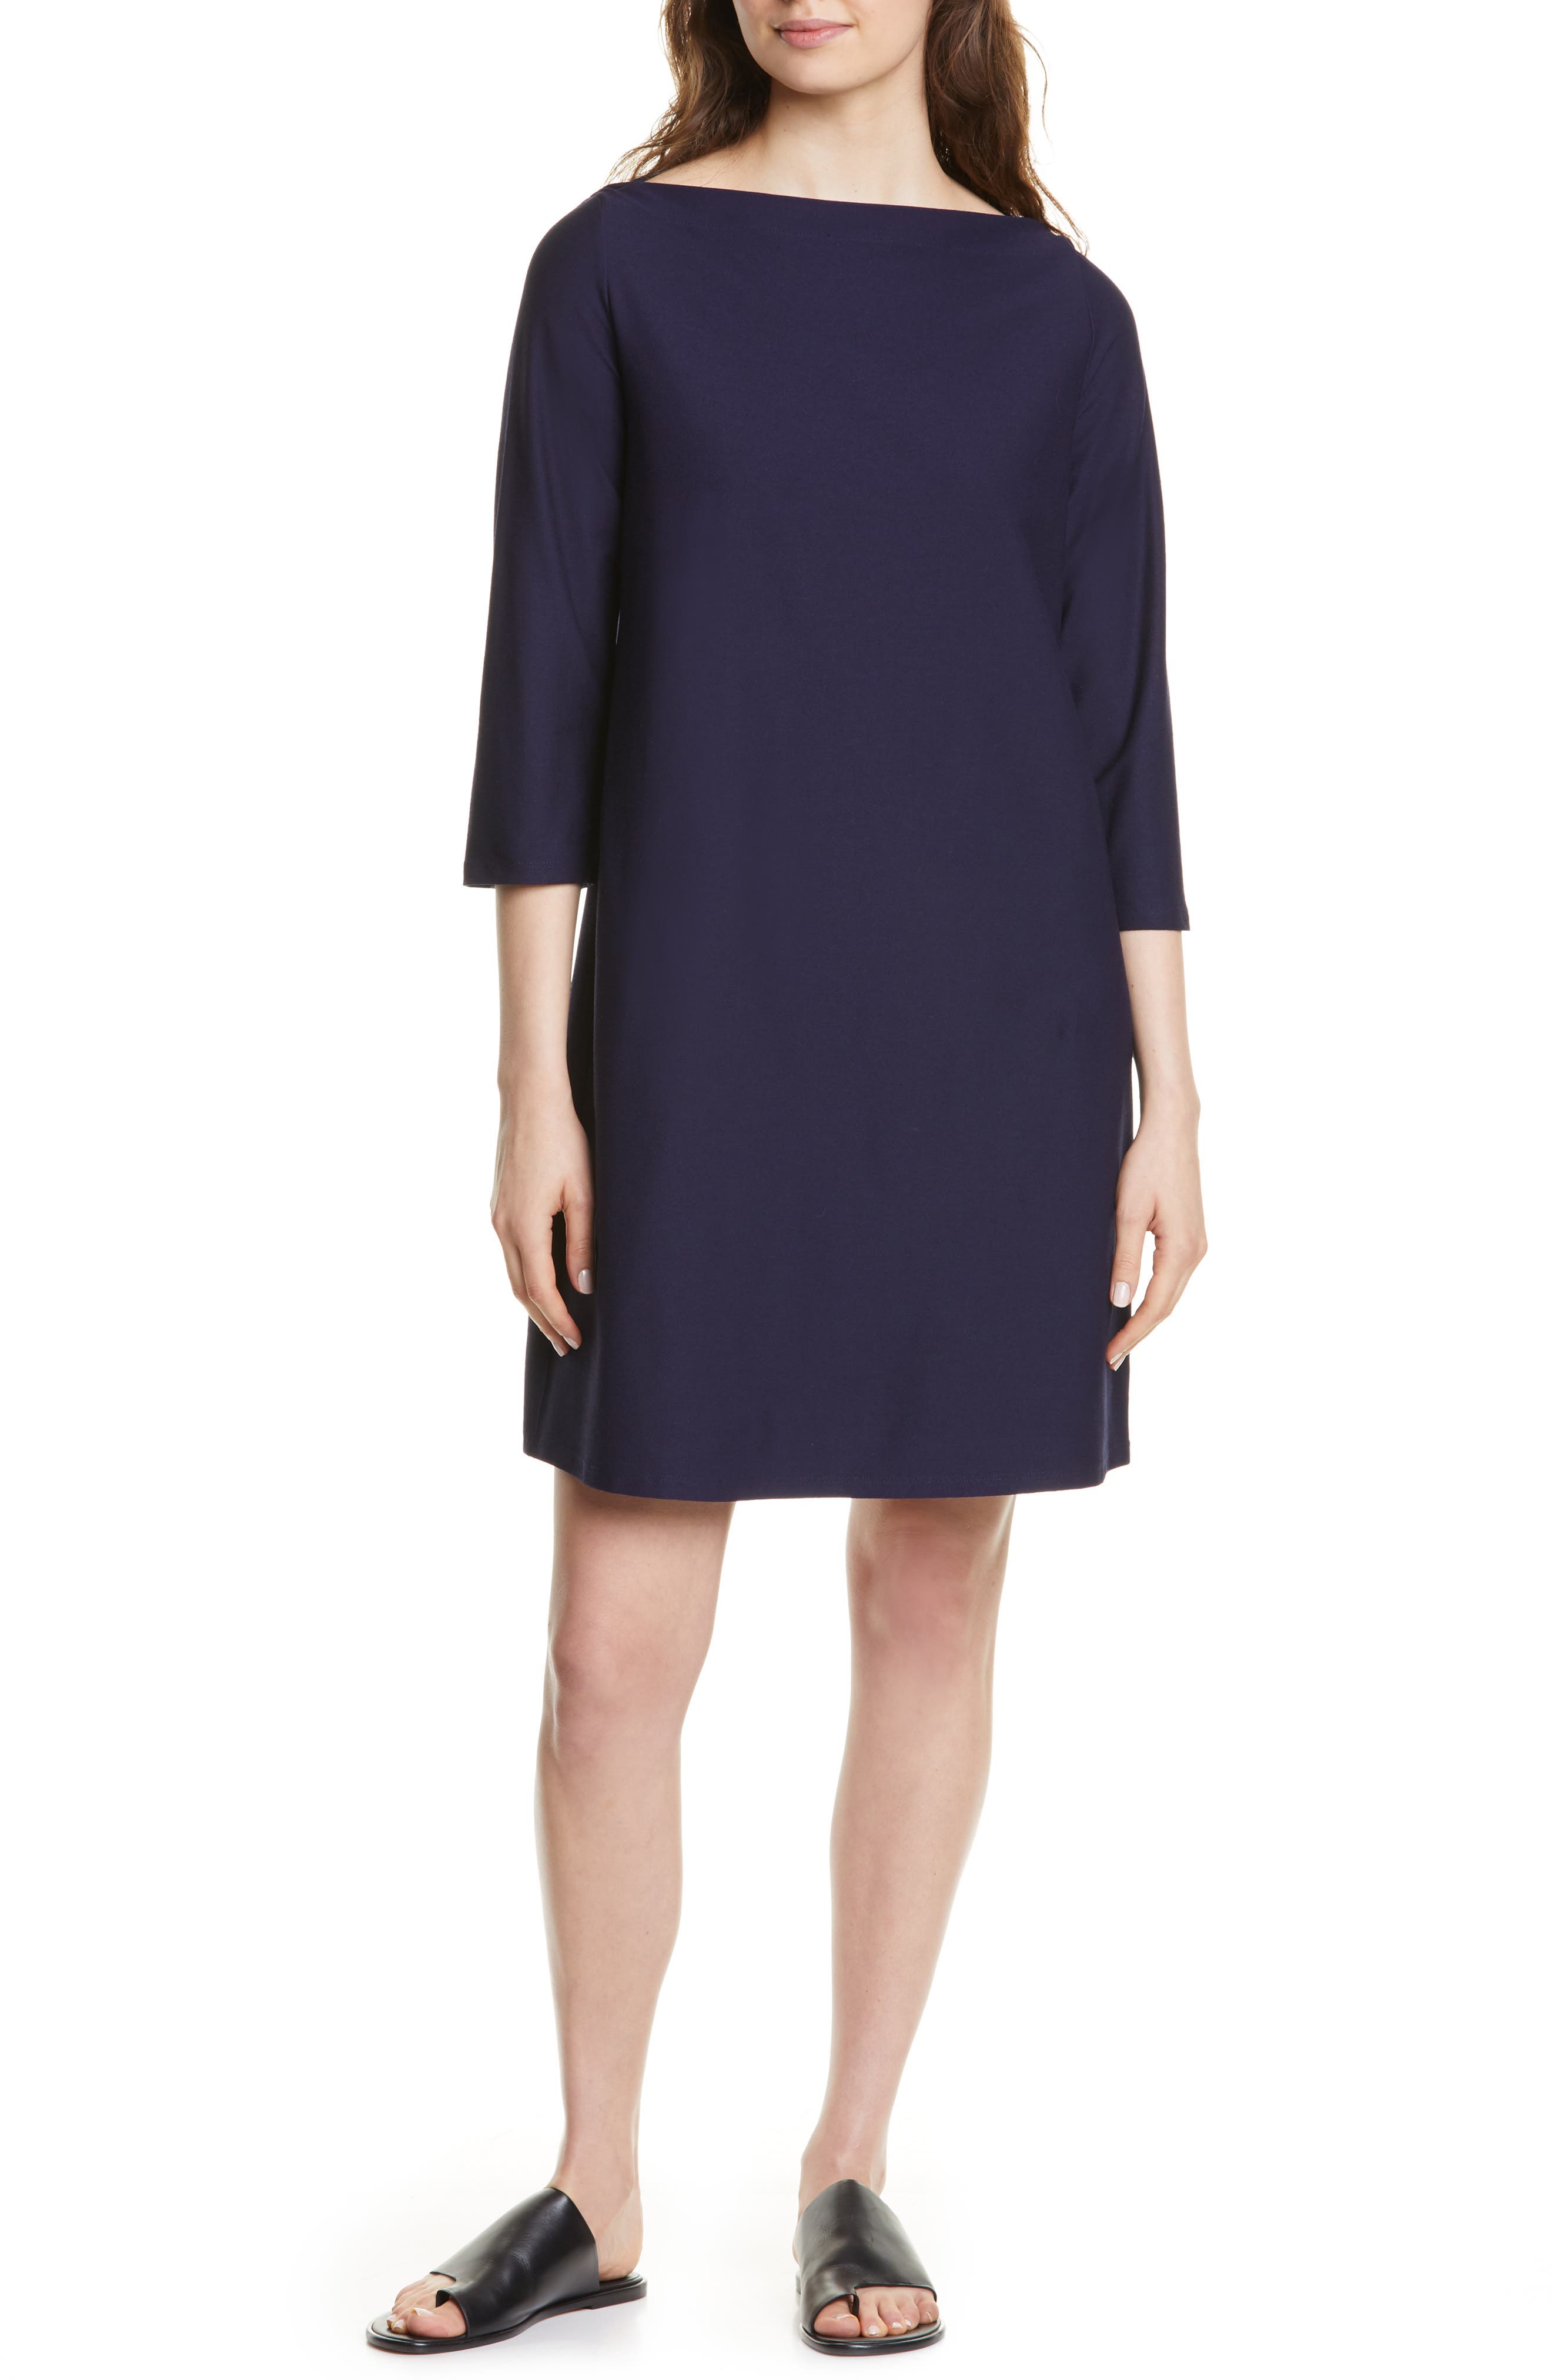 Eileen Fisher Bateau Neck Shift Dress in Midnight at Nordstrom